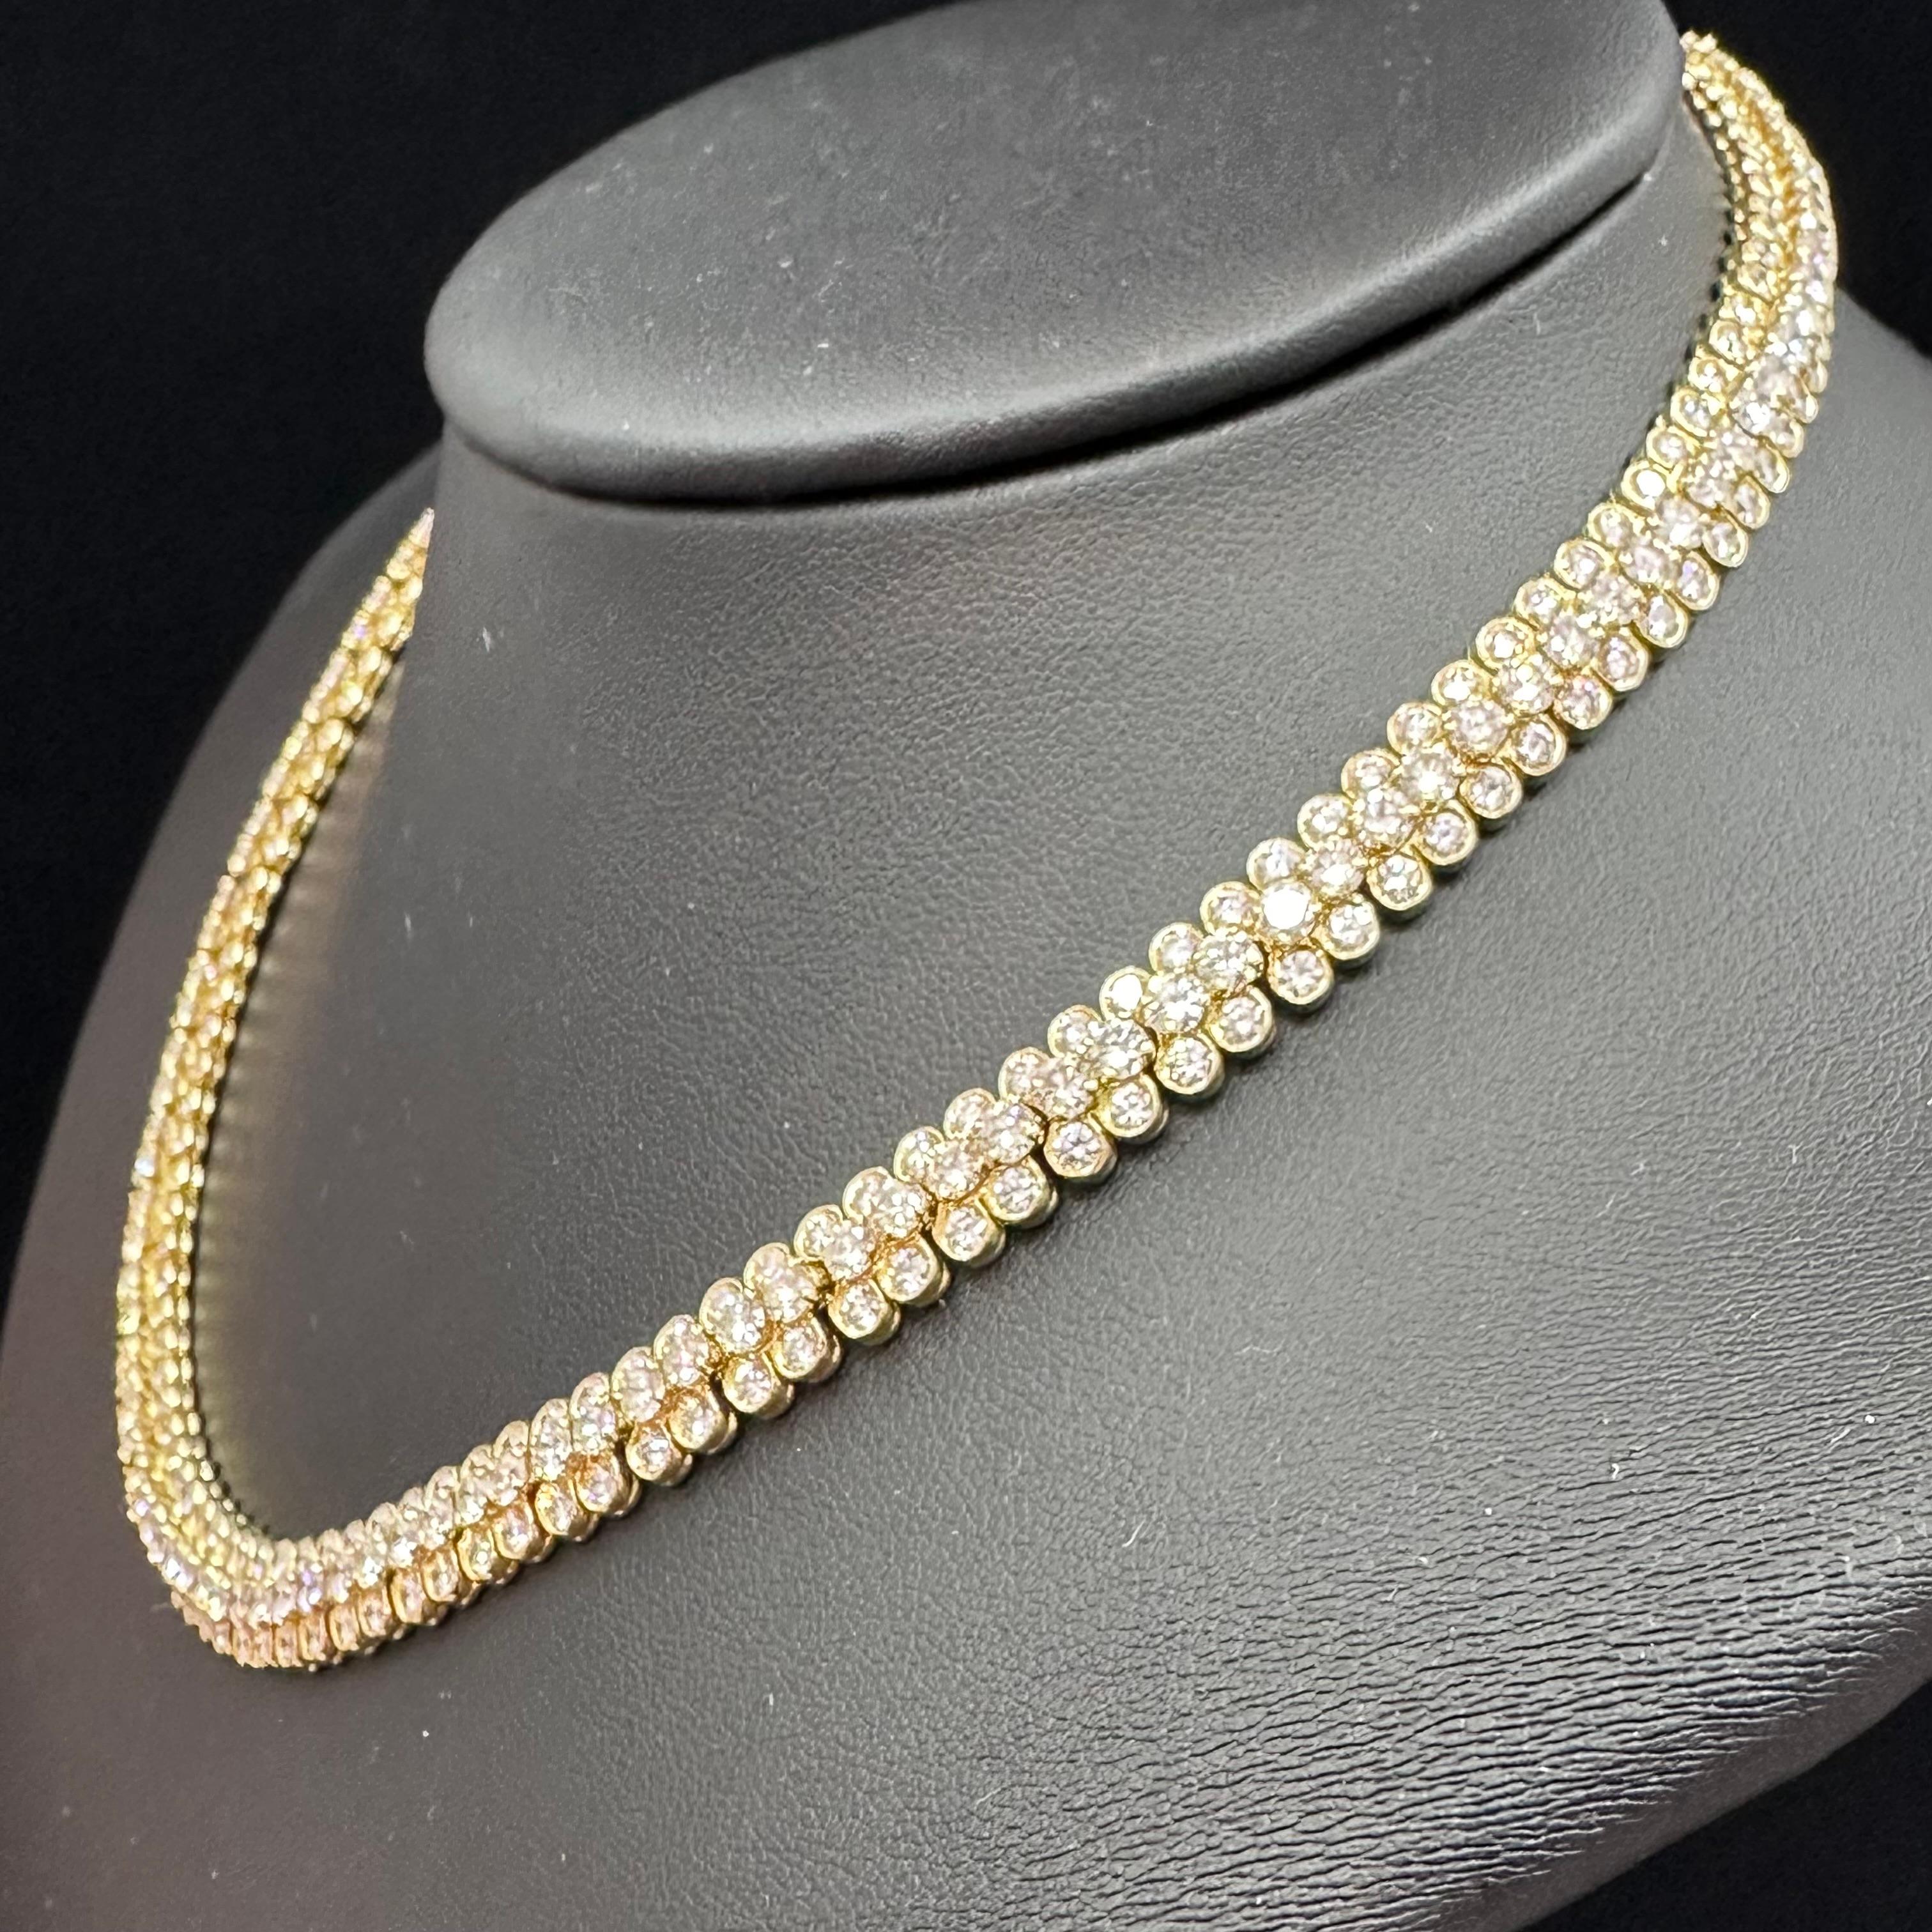 Van Cleef and Arpels Cheval 3 Row Diamond Yellow Gold Necklace, Estimated 25 Cts Total Weight of Fine D-E Color and VVS clarity.
Signed Van Cleef & Arpels NY 55xxx

About
Revealed in all their radiant purity, diamonds captivate the eye in the À